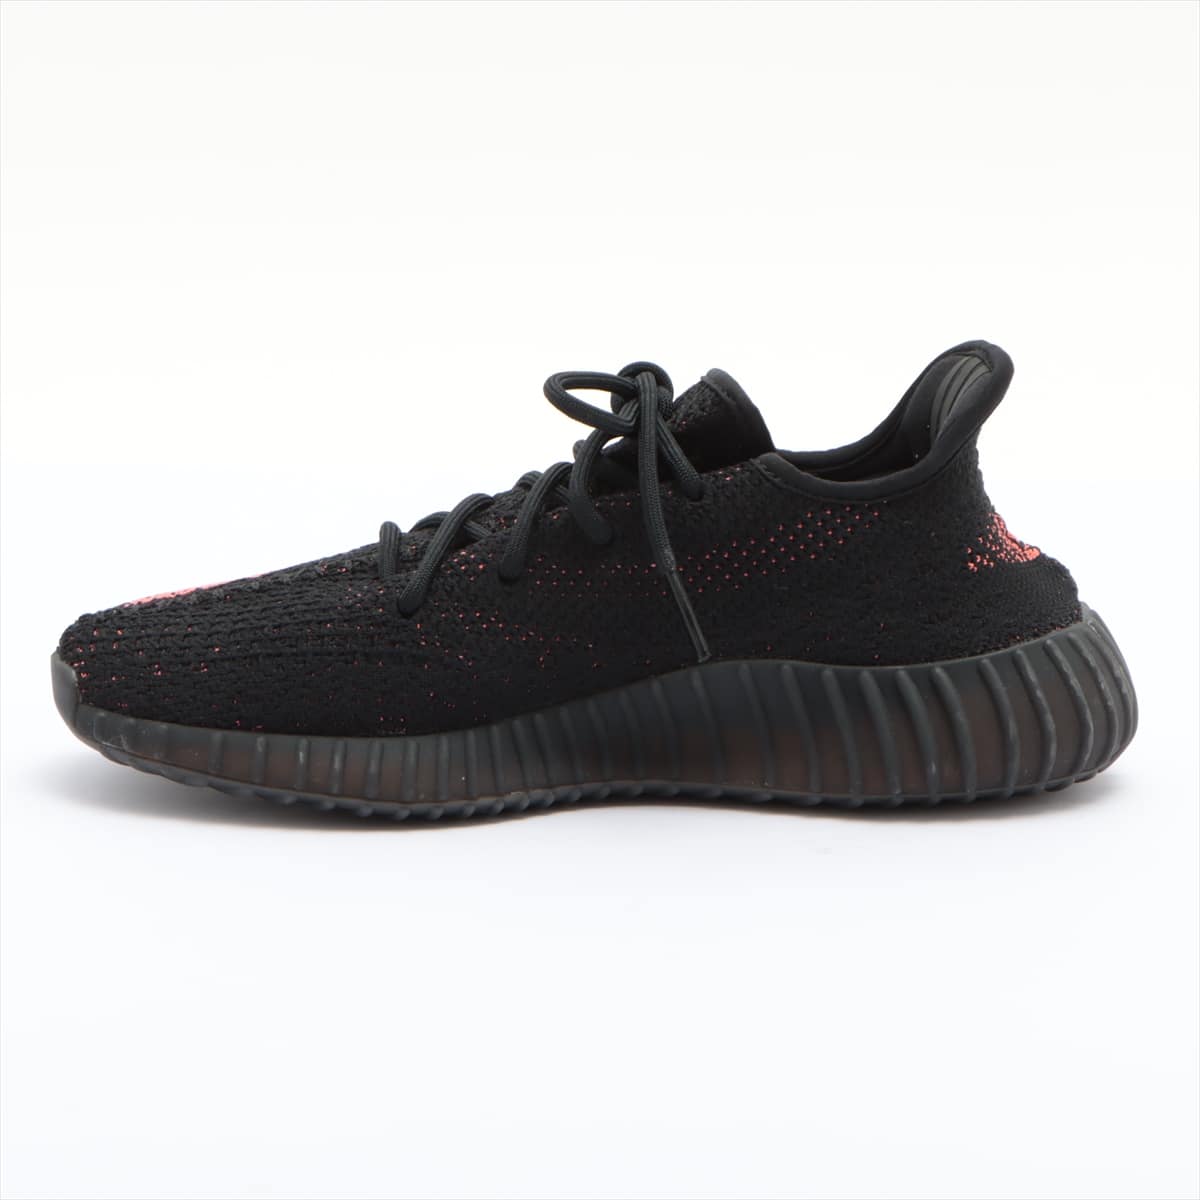 adidas x Kanye West YEEZY BOOST 350 V2 Knit Sneakers 26cm Men's Black BY9612